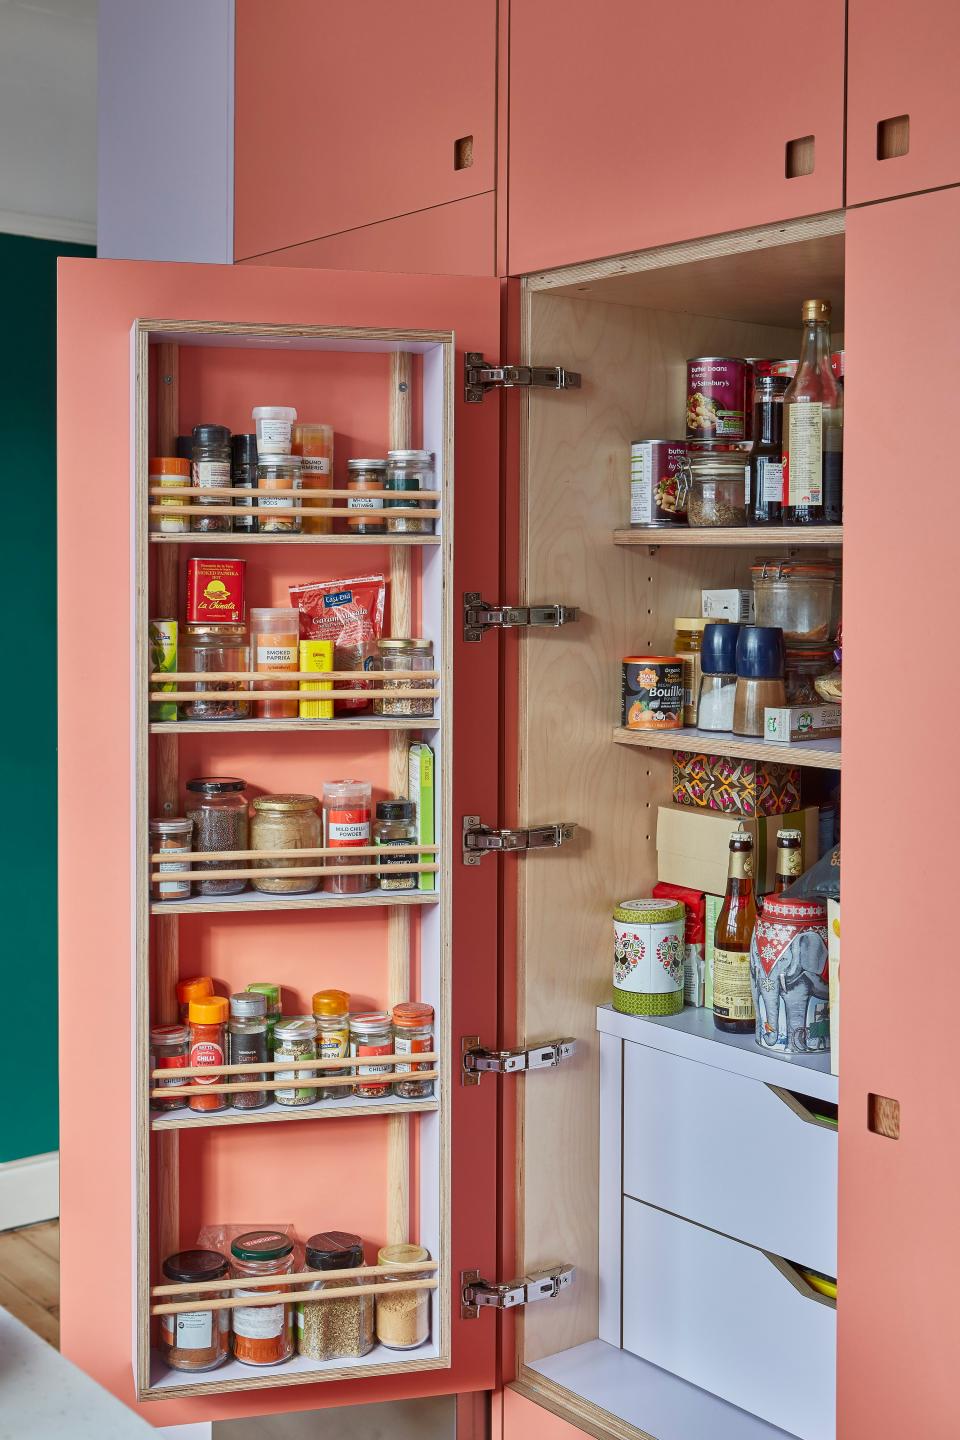 Spices fit brilliantly in the pantry door.